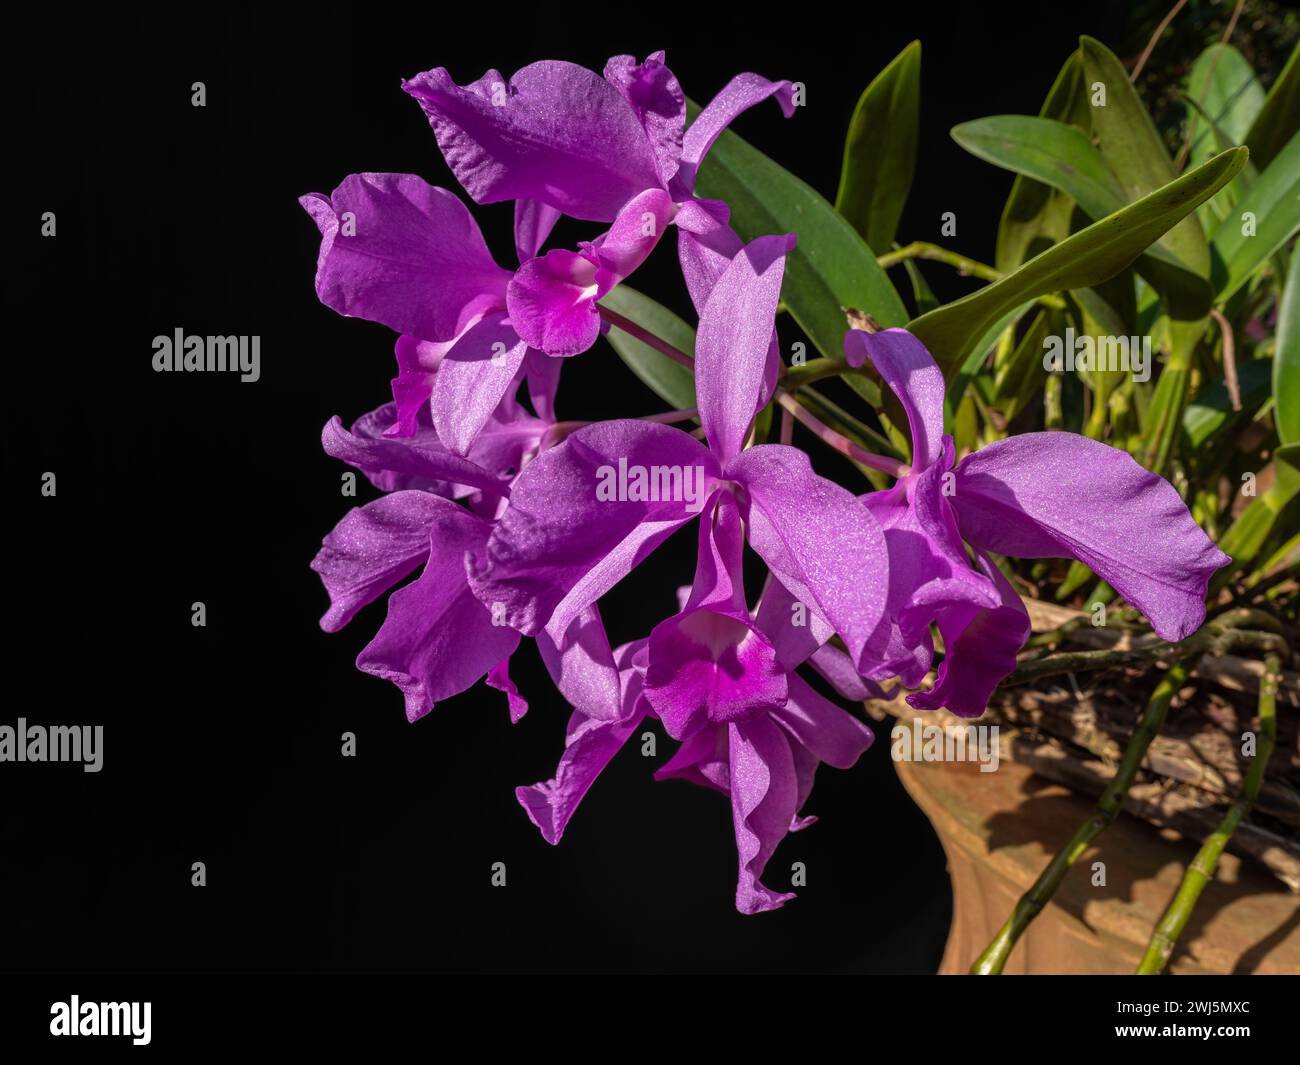 Closeup view of bright purple pink flowers of cattleya orchid hybrid blooming outdoors on black background Stock Photo